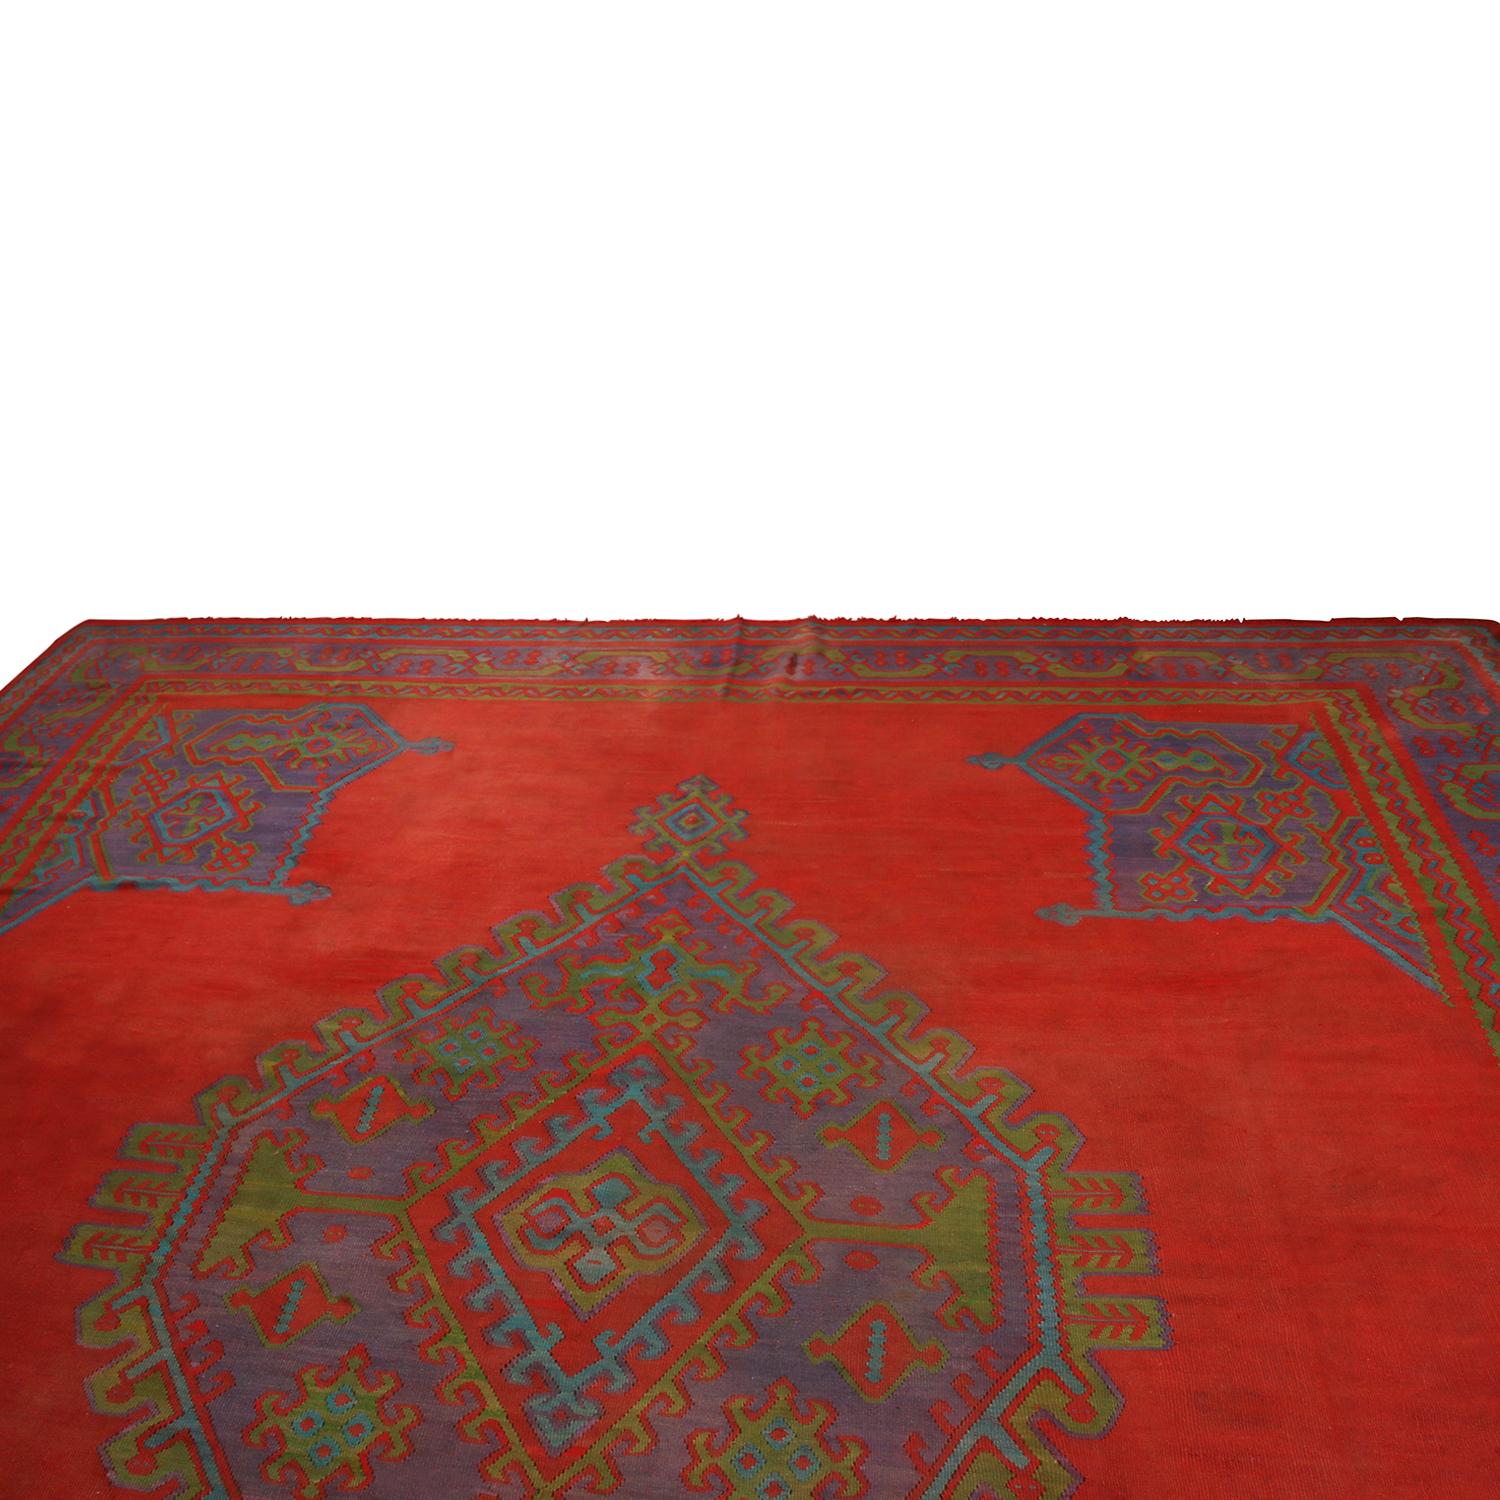 Originating from Turkey between 1890-1900, this antique Usak Kilim rug enjoys an engaging array of red, indigo, and green colorways, the latter accenting the former in marriage to the ornate-meets-Minimalist geometric design complementing this